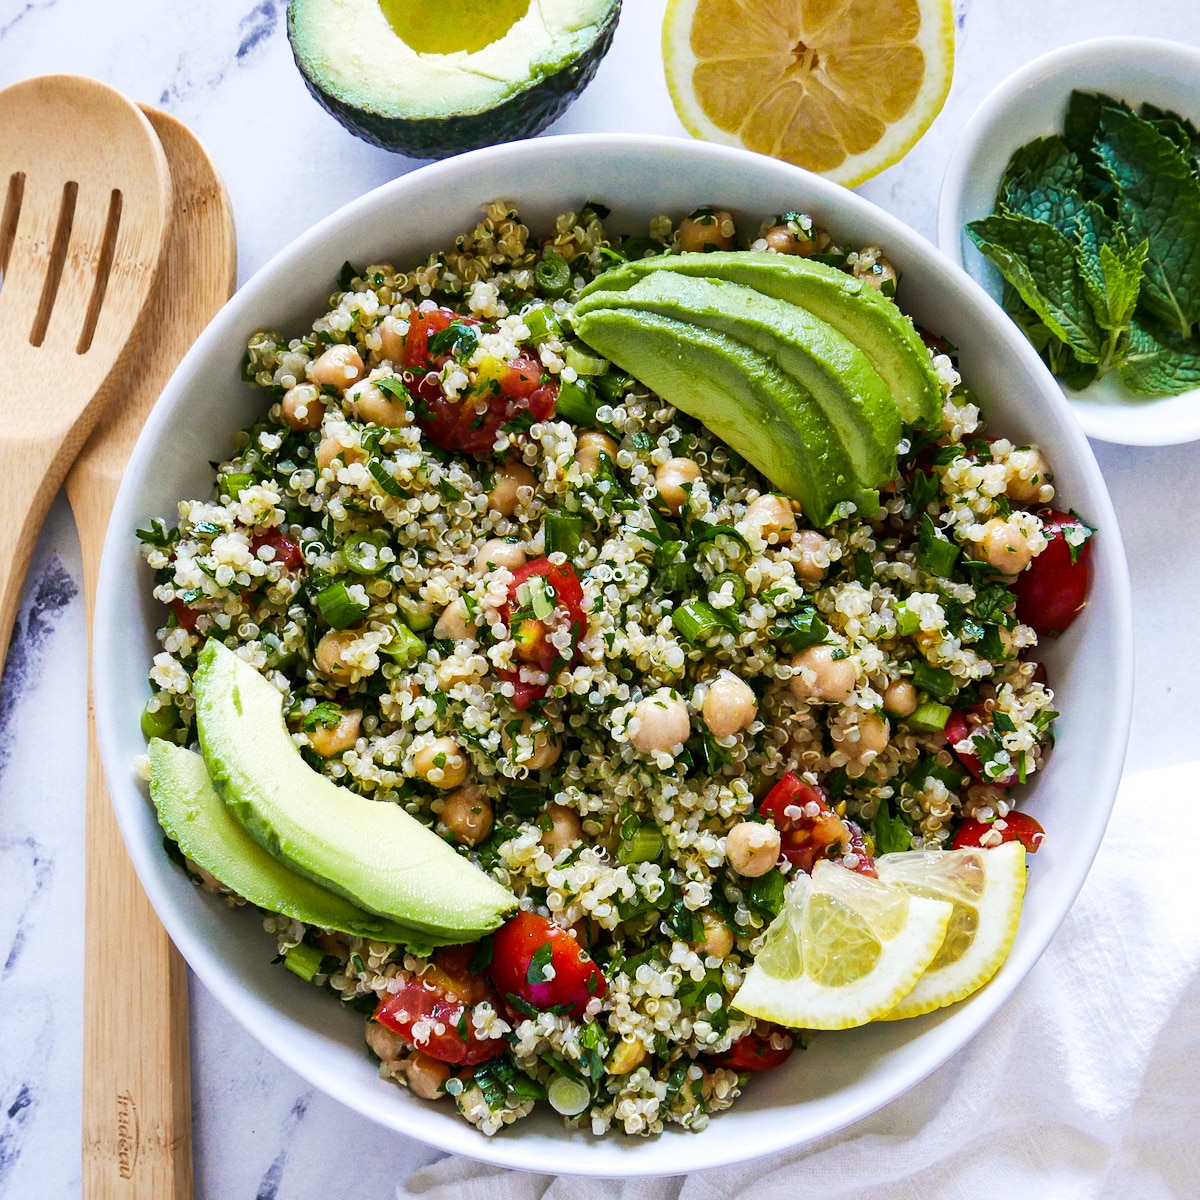 gluten free tabbouleh garnished with avocado, lemon, and chopped mint.